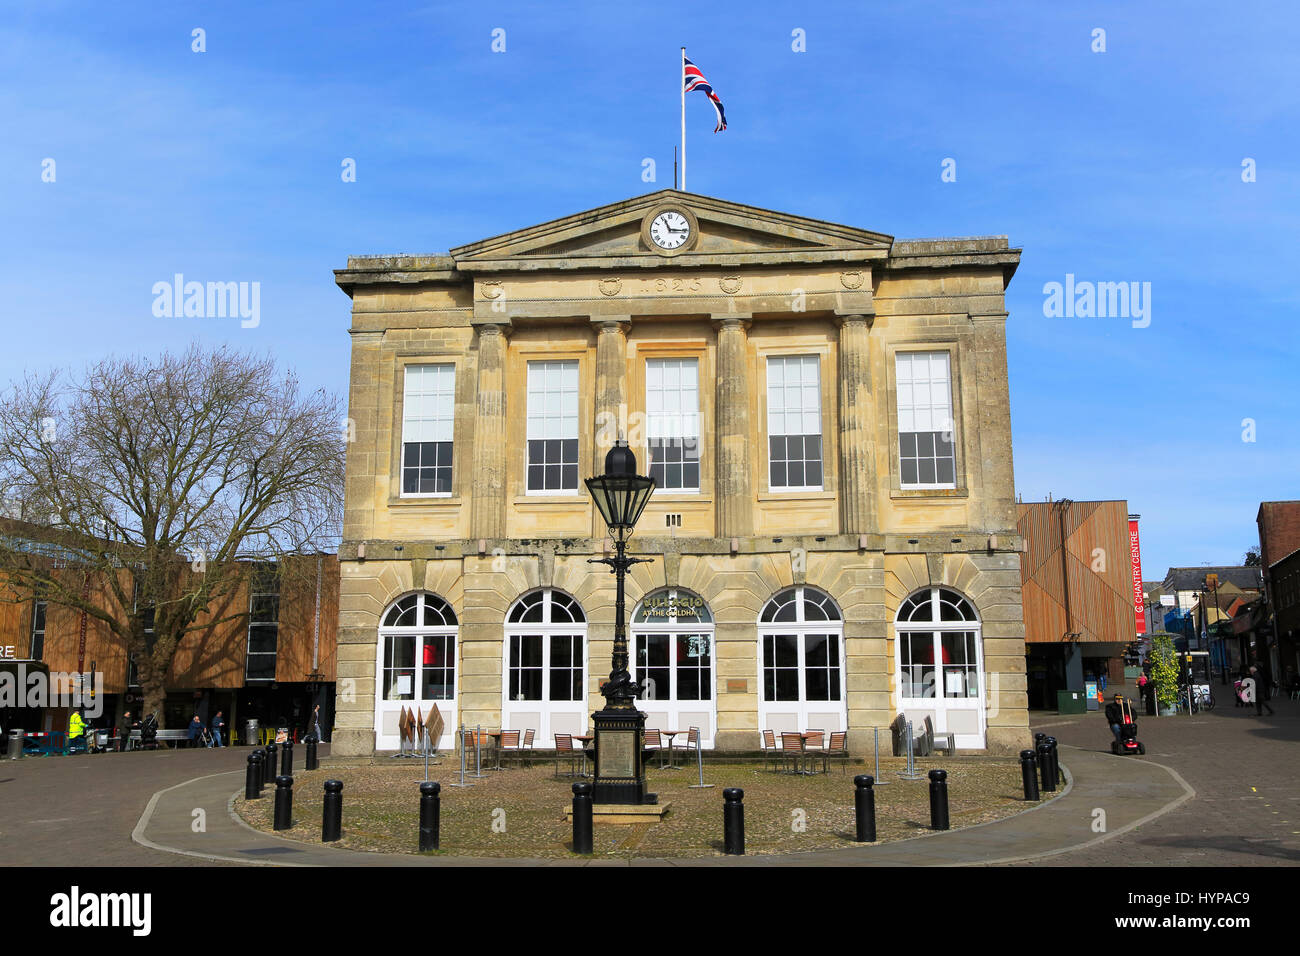 Georgian architecture of Guildhall building, Andover, Hampshire, England, UK built 1825 Stock Photo